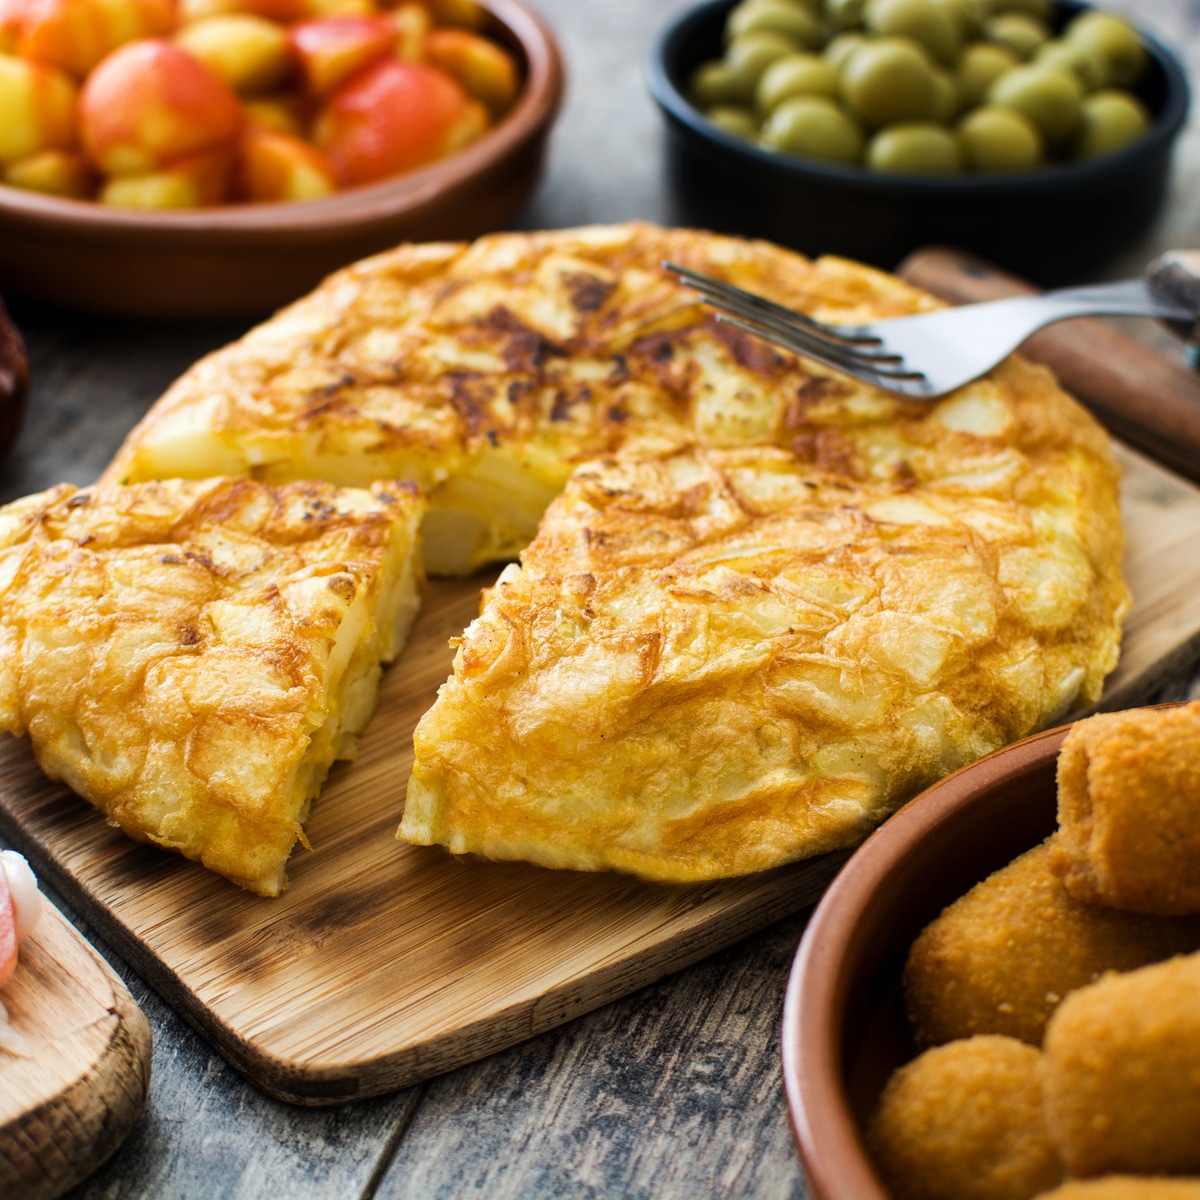 All the Different Spanish Tortilla Recipes | Fascinating Spain